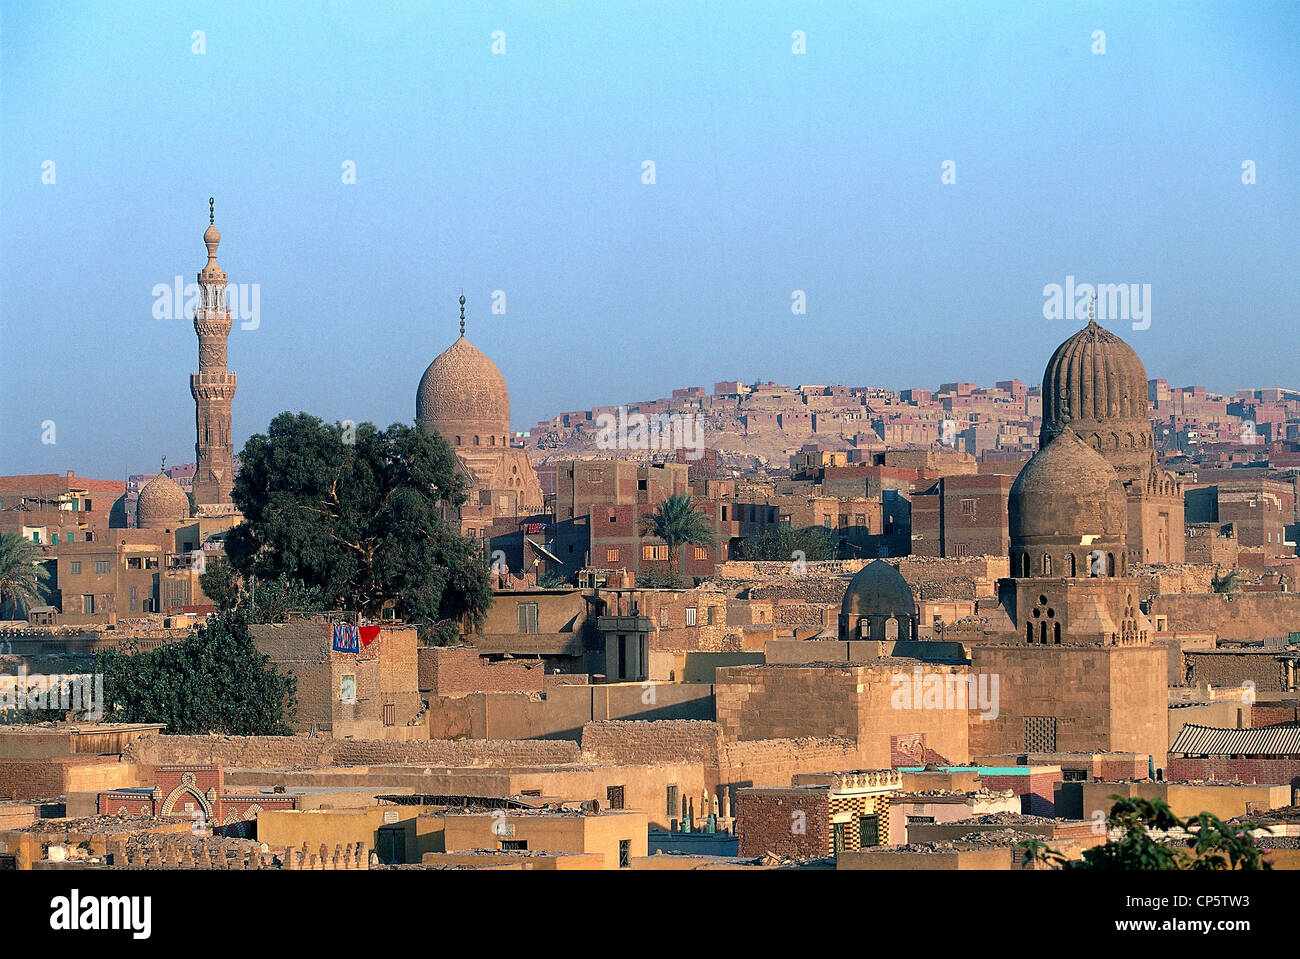 Egypt - Cairo - City of the Dead, view with the tombs of the caliphs. Stock Photo